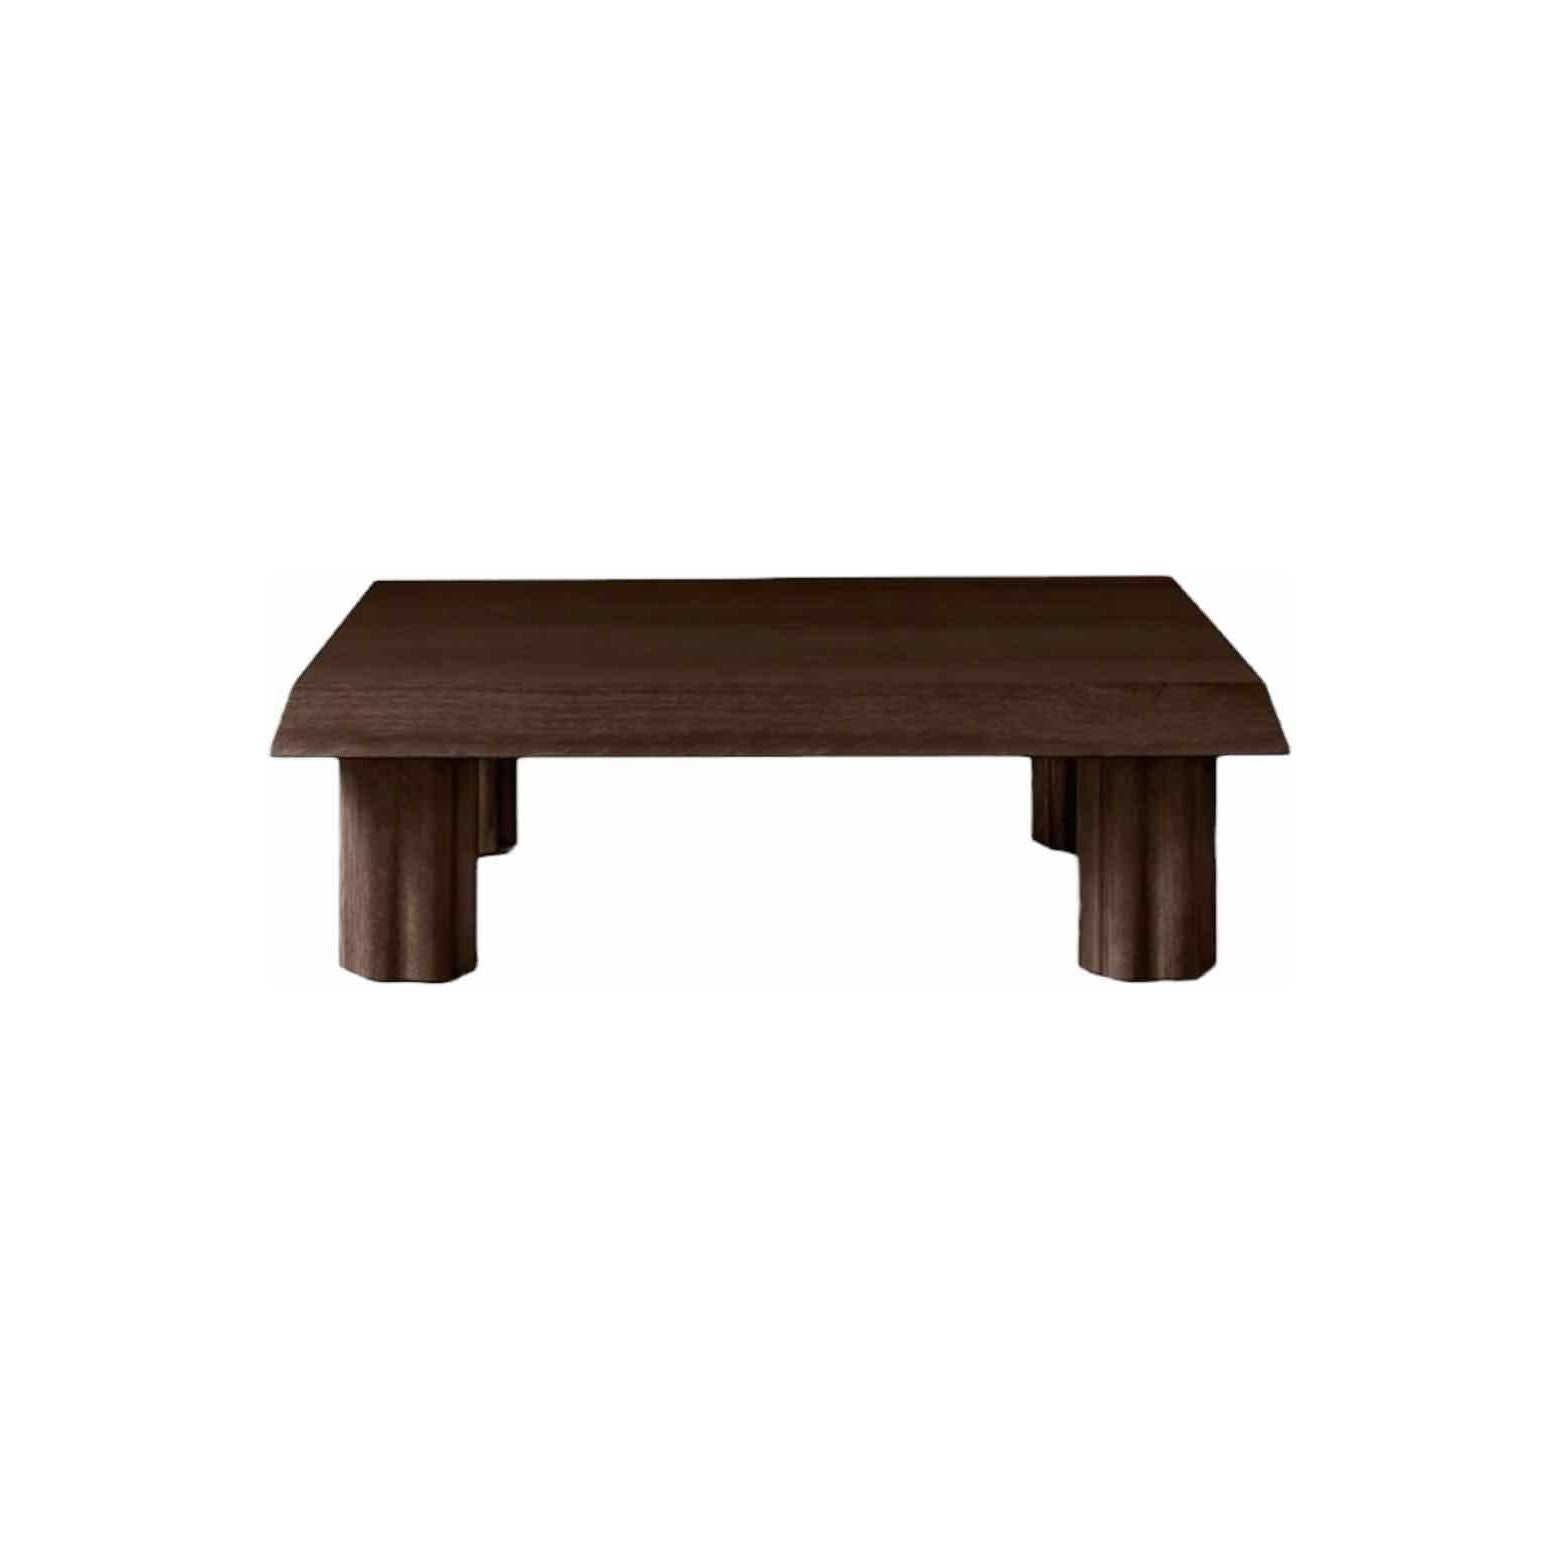 Maiden Home 'The Dean' Coffee Table in Chocolate Oak